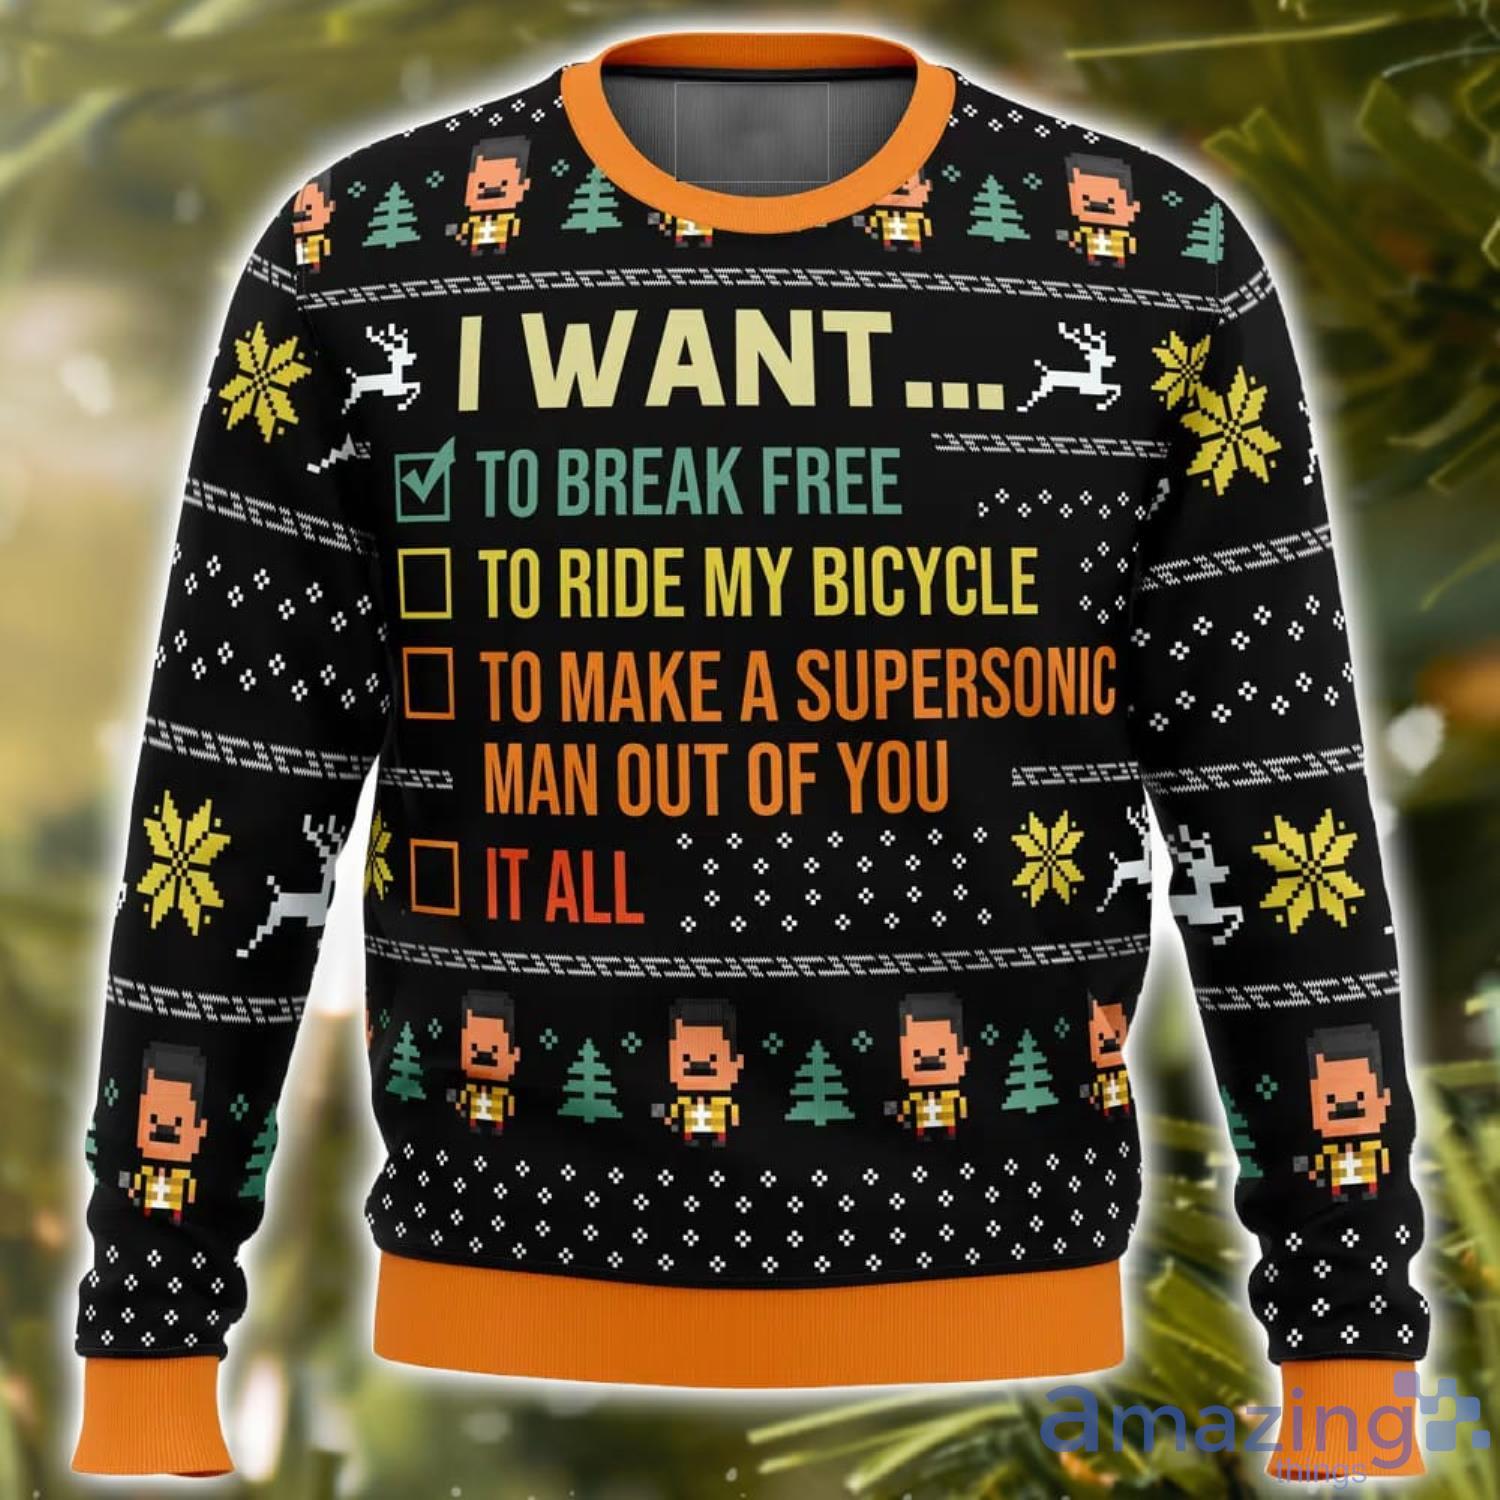 https://image.whatamazingthings.com/2023/11/i-want-to-break-free-queen-aop-ugly-christmas-sweater-christmas-holiday-gift-for-men-and-women.jpg